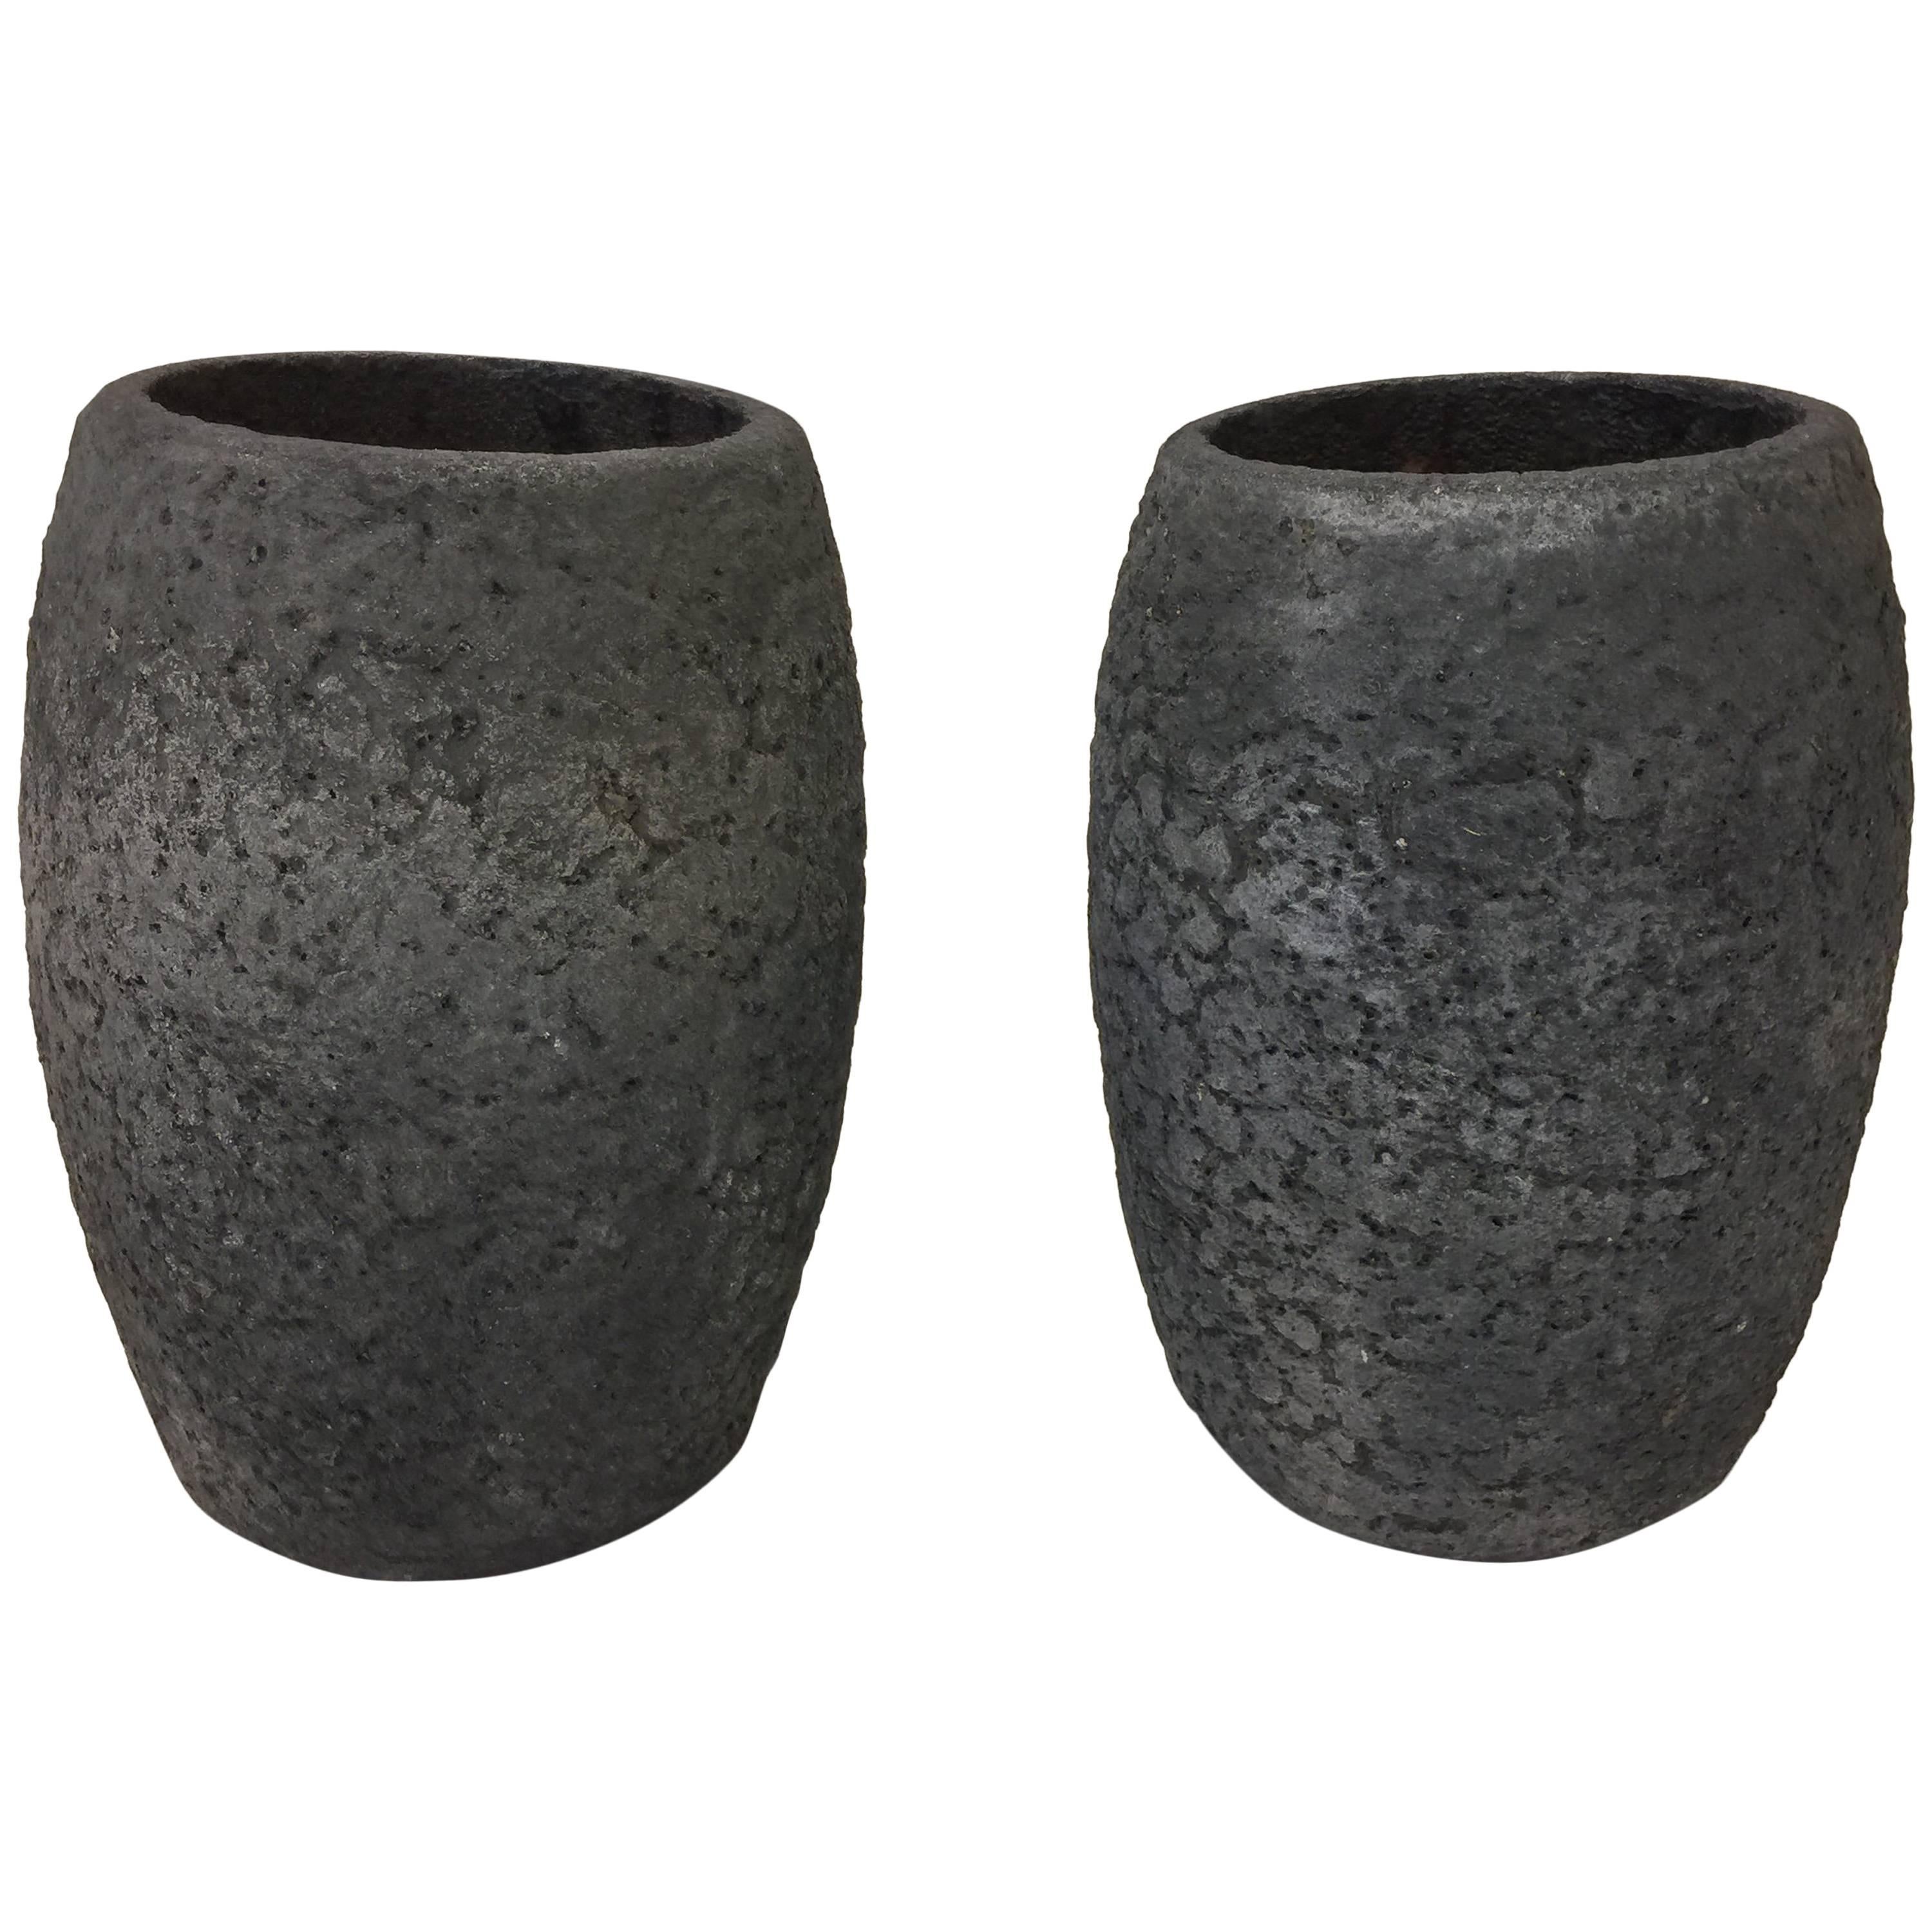 Pair of Crucibles in Volcanic Stone Textured Finish